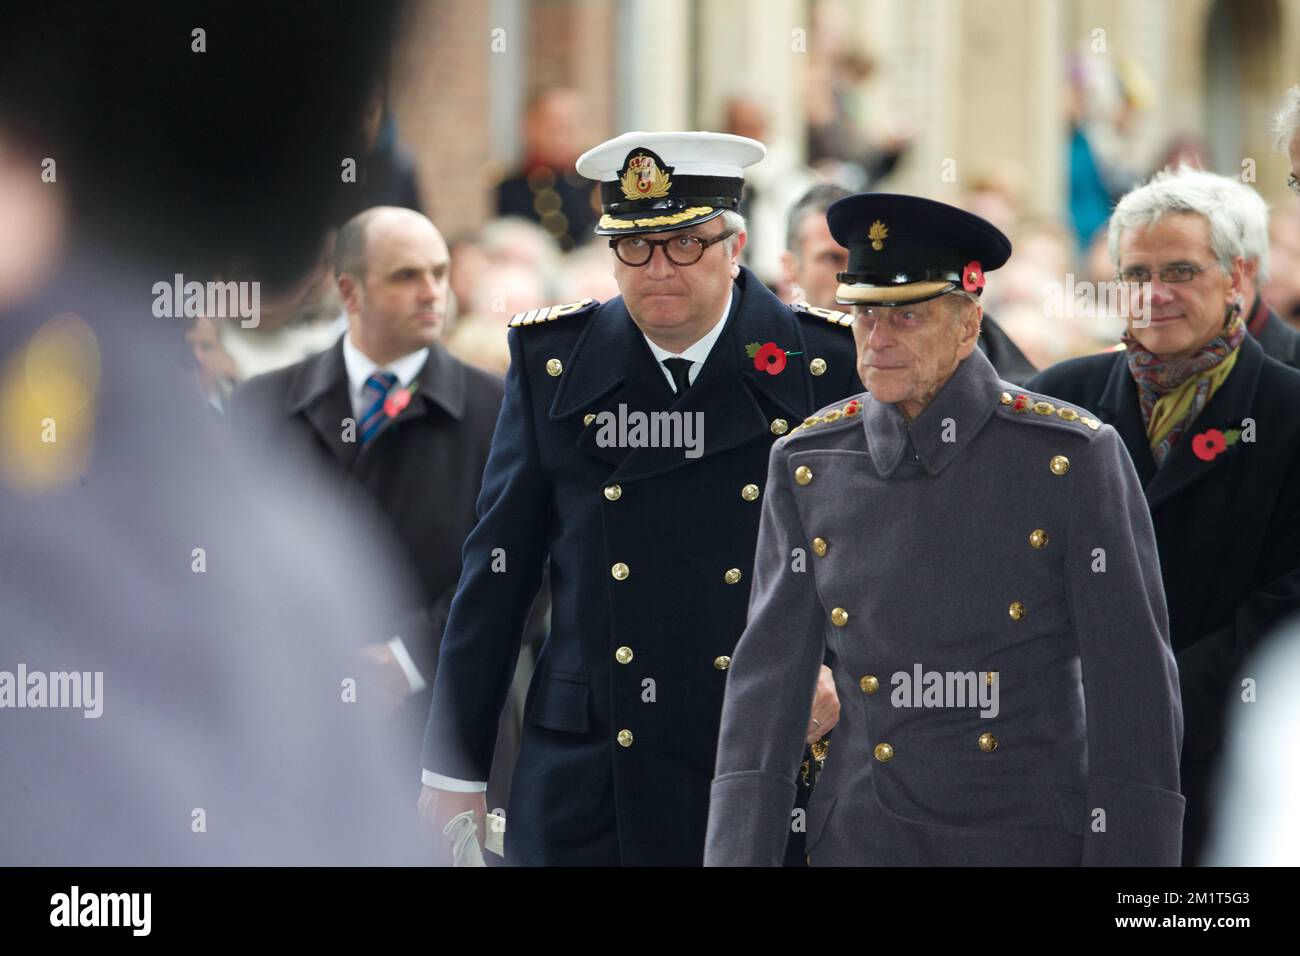 20131111 - IEPER, BELGIUM: Prince Laurent of Belgium and Prince Philip, Duke of Edinburgh pictured during the Last Post ceremony, a commemoration of World War I (1914-1918), commonly known as Remembrance Day, at the Menenport, in Ieper (Ypres), Monday 11 November 2013. Ahead of the centenary of the start of the WWI, 70 bags of sacred soil from the battlefield and cemeteries in the area will be delivered to a delegation of the prestigious Guards Regiment on the way to London for the Flanders Field Memorial Garden to the memory of British soldiers who fell during WWI. The ceasefire went into eff Stock Photo